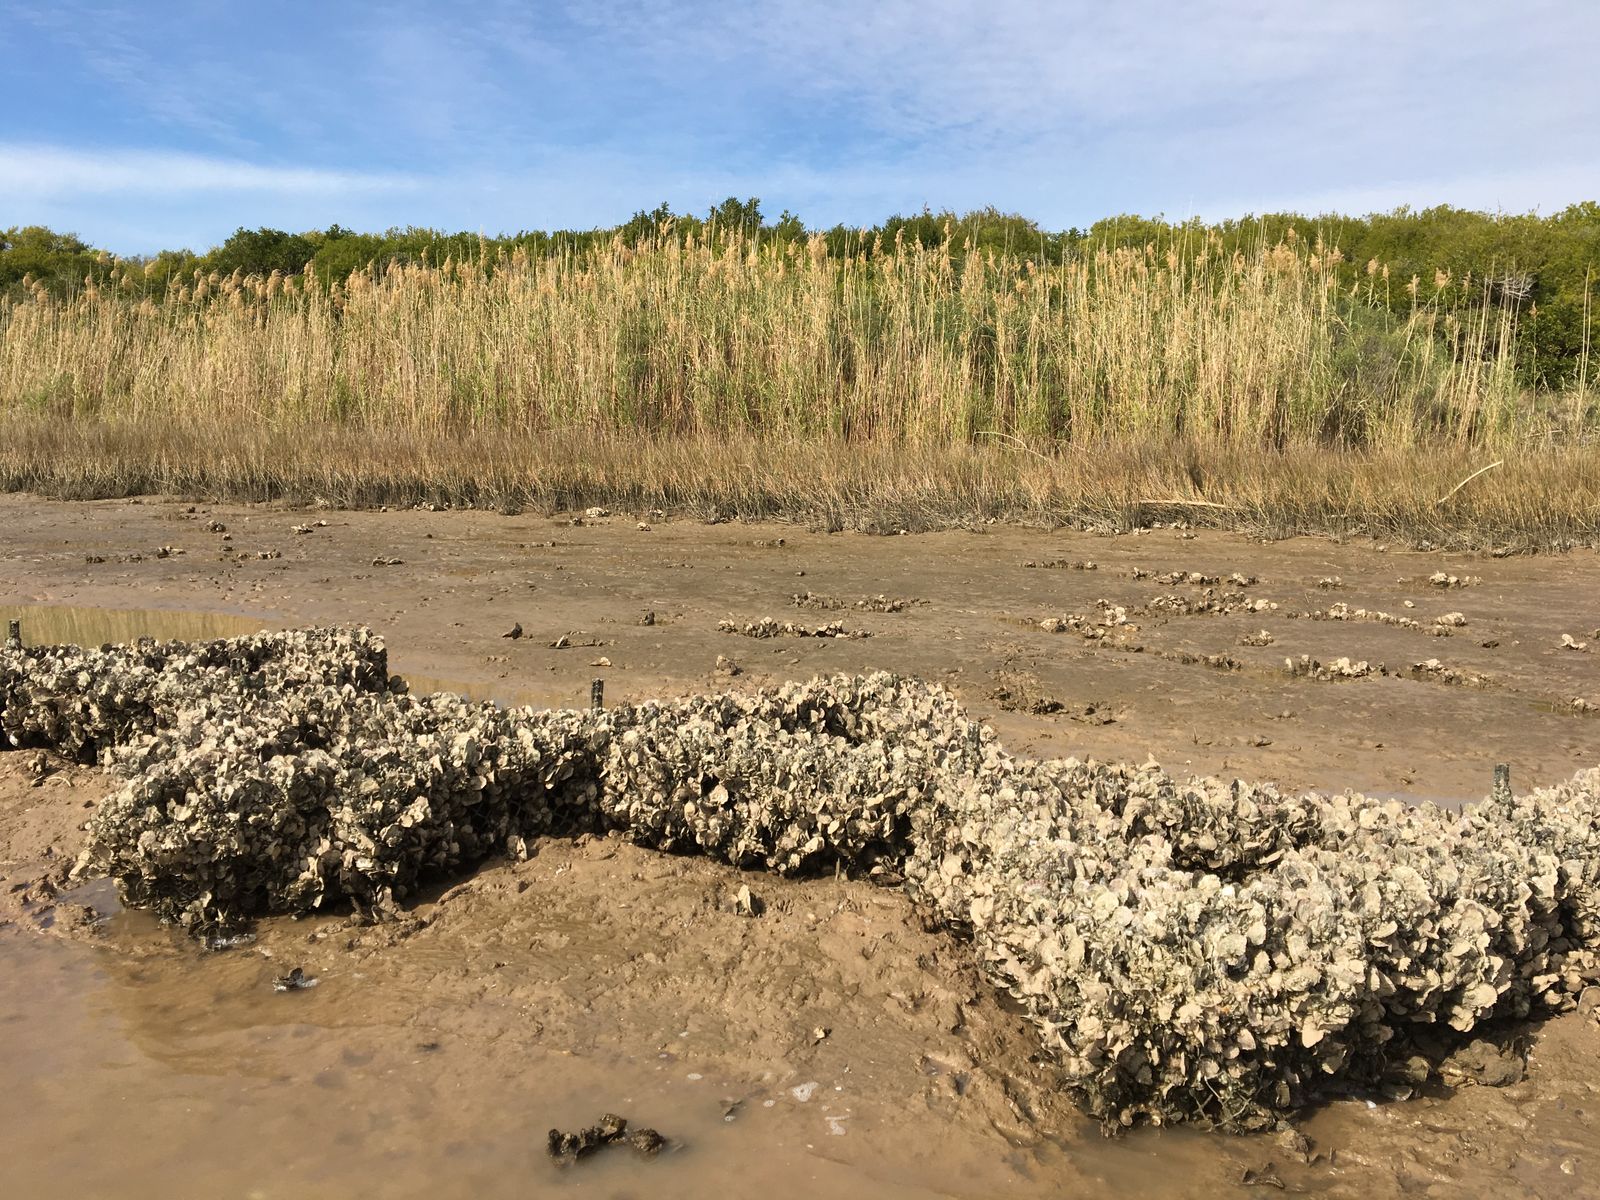 As Storms Get Bigger, Oyster Reefs Can Help Protect Shorelines